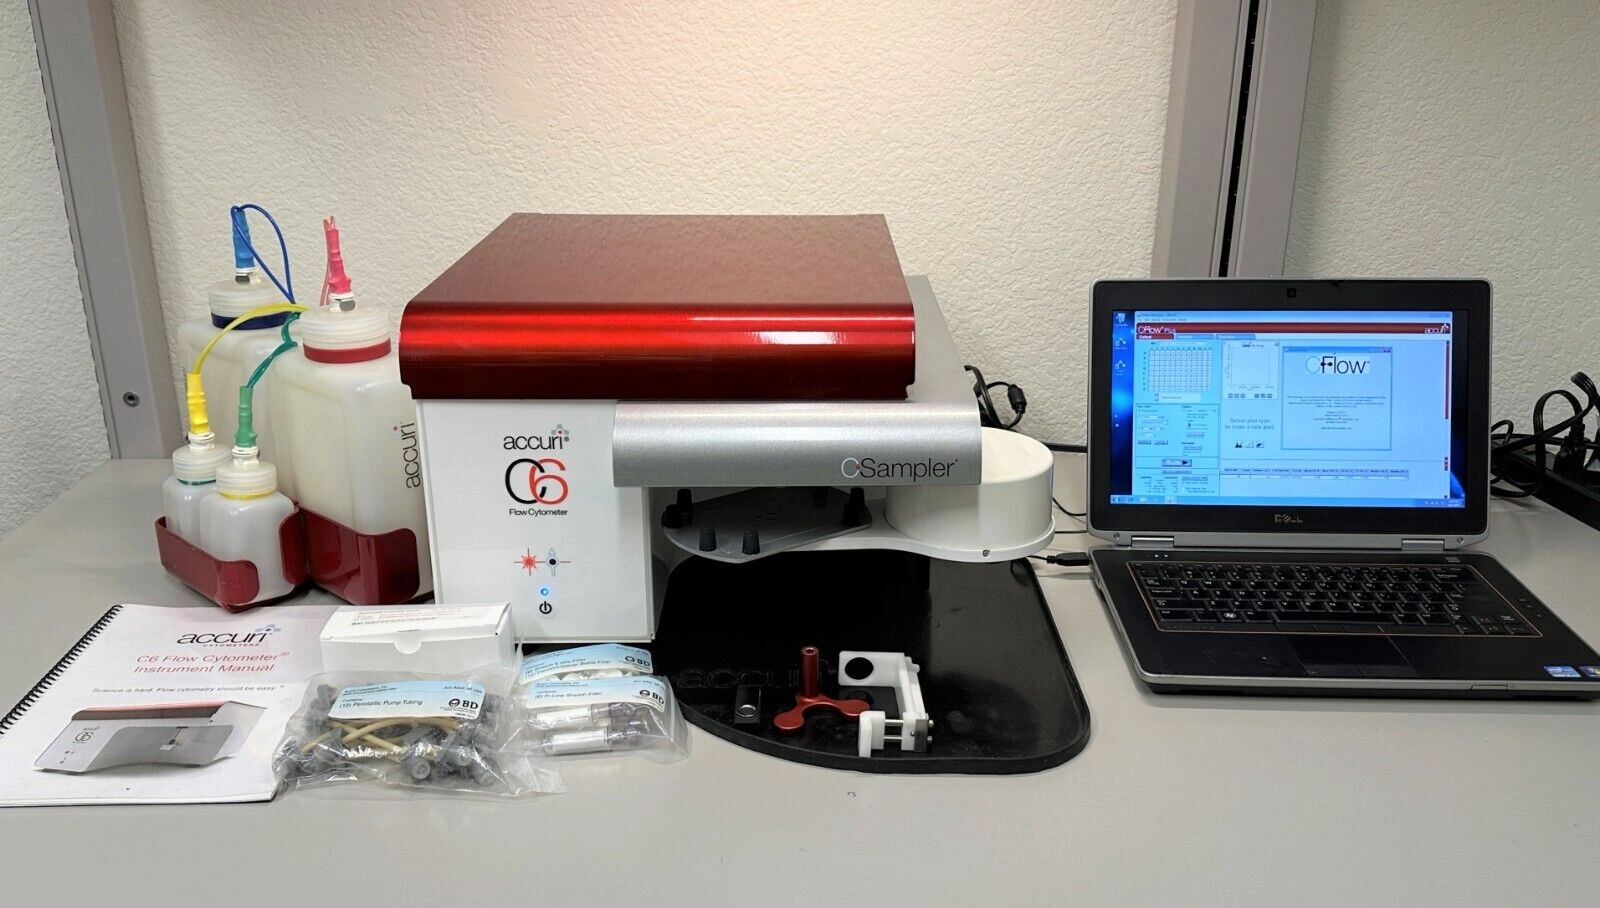 BD Accuri C6 and Csampler Flow Cytometer system wi